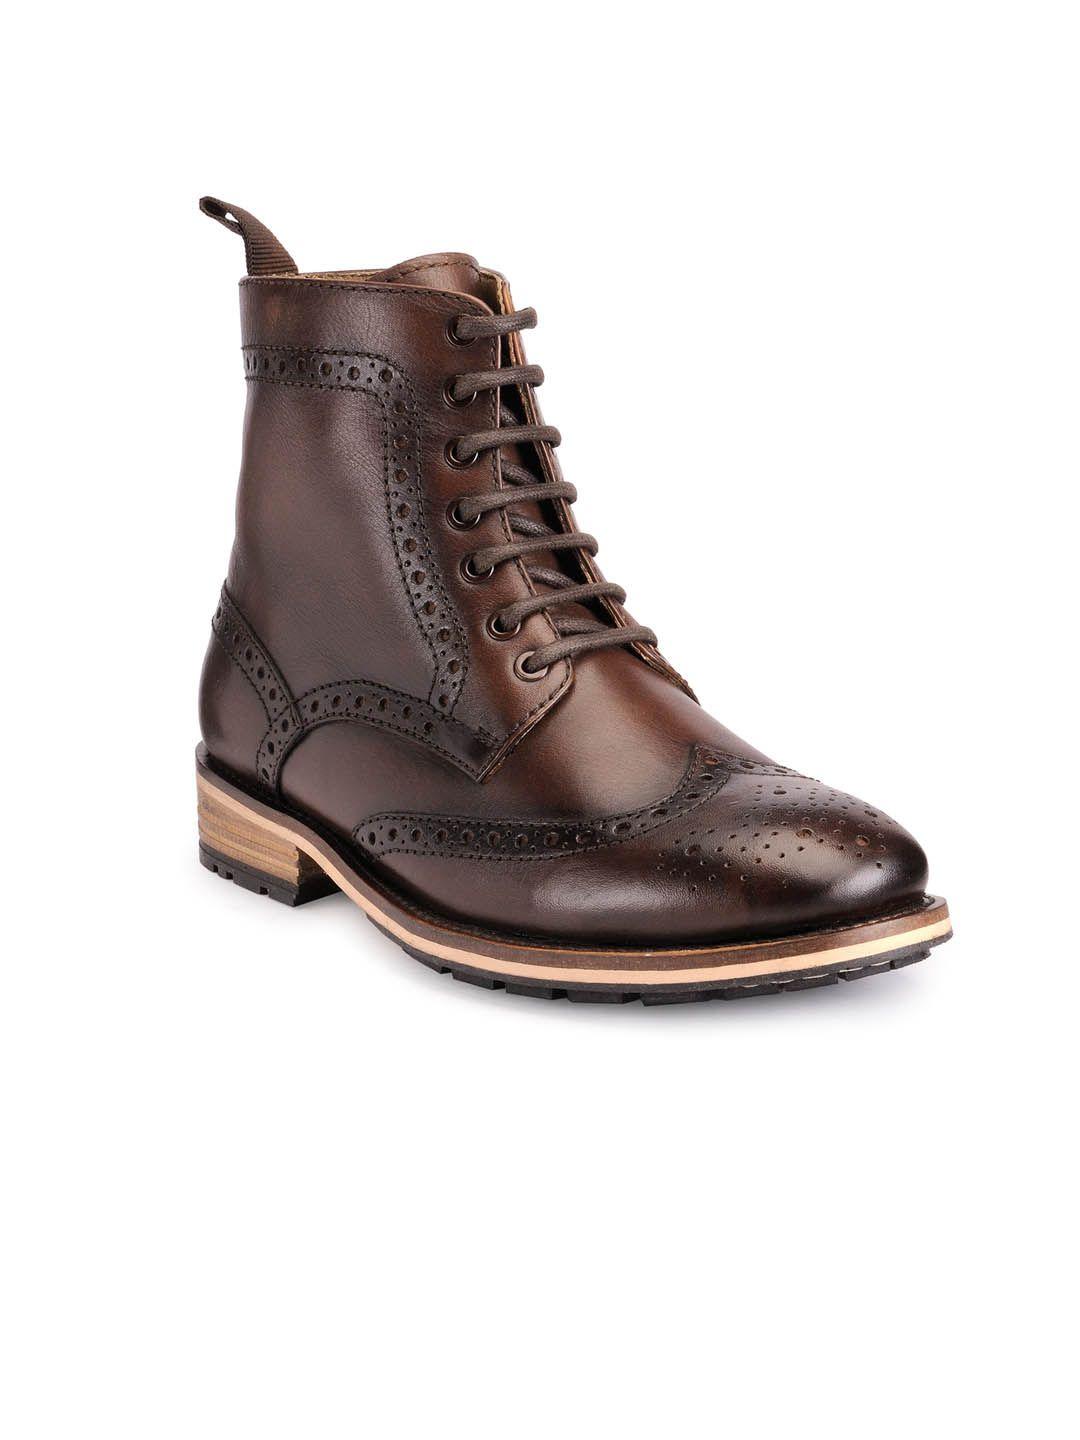 teakwood leathers men brown solid leather boots